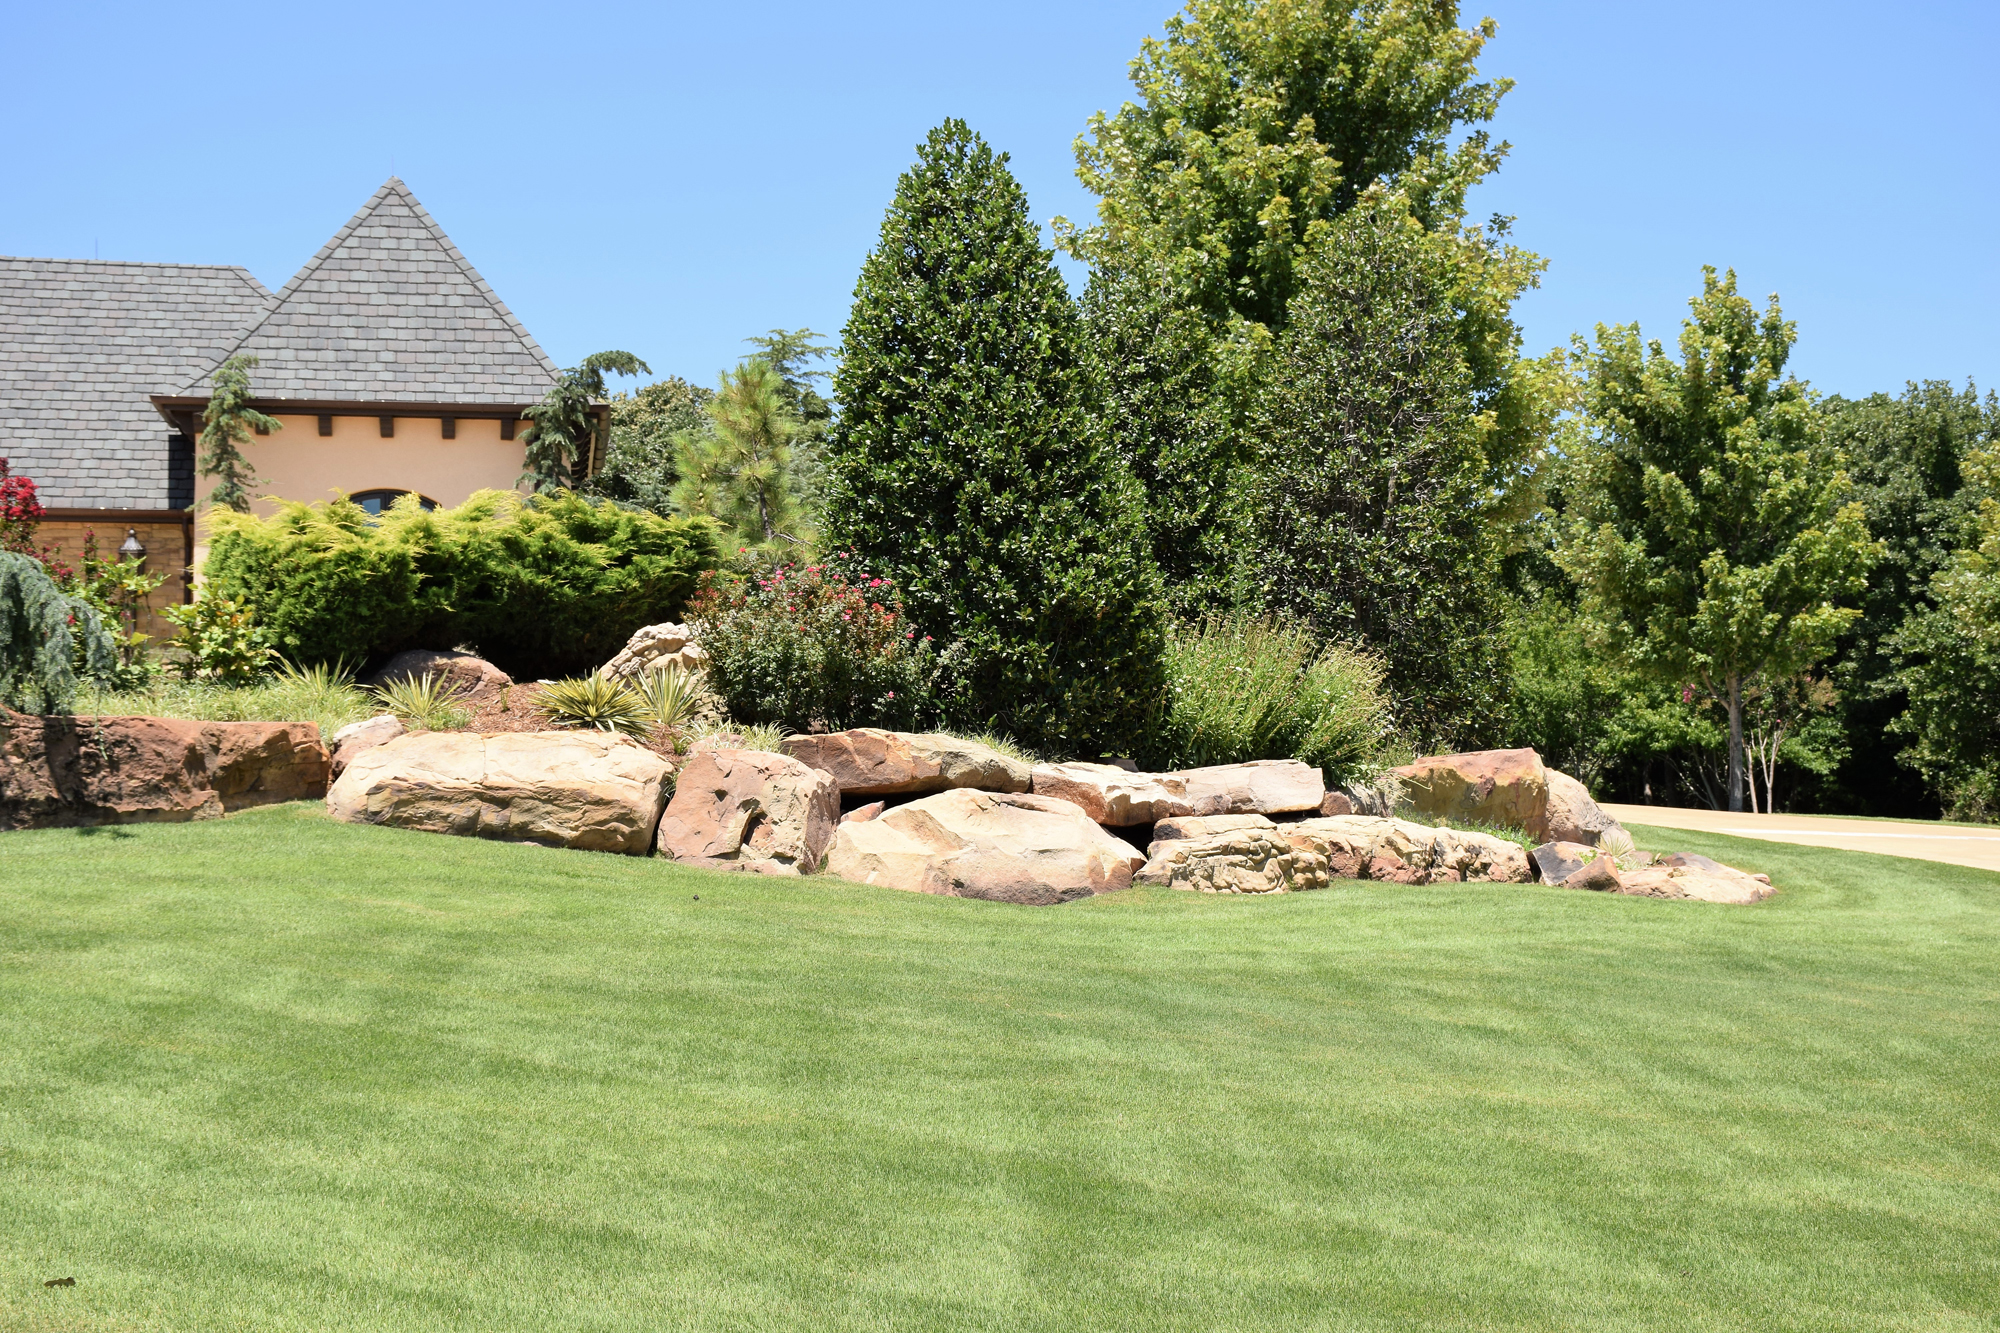 With lawn seeding from e-greenleaf of OKC, your lawn will look thick and beautiful every time we cut it.